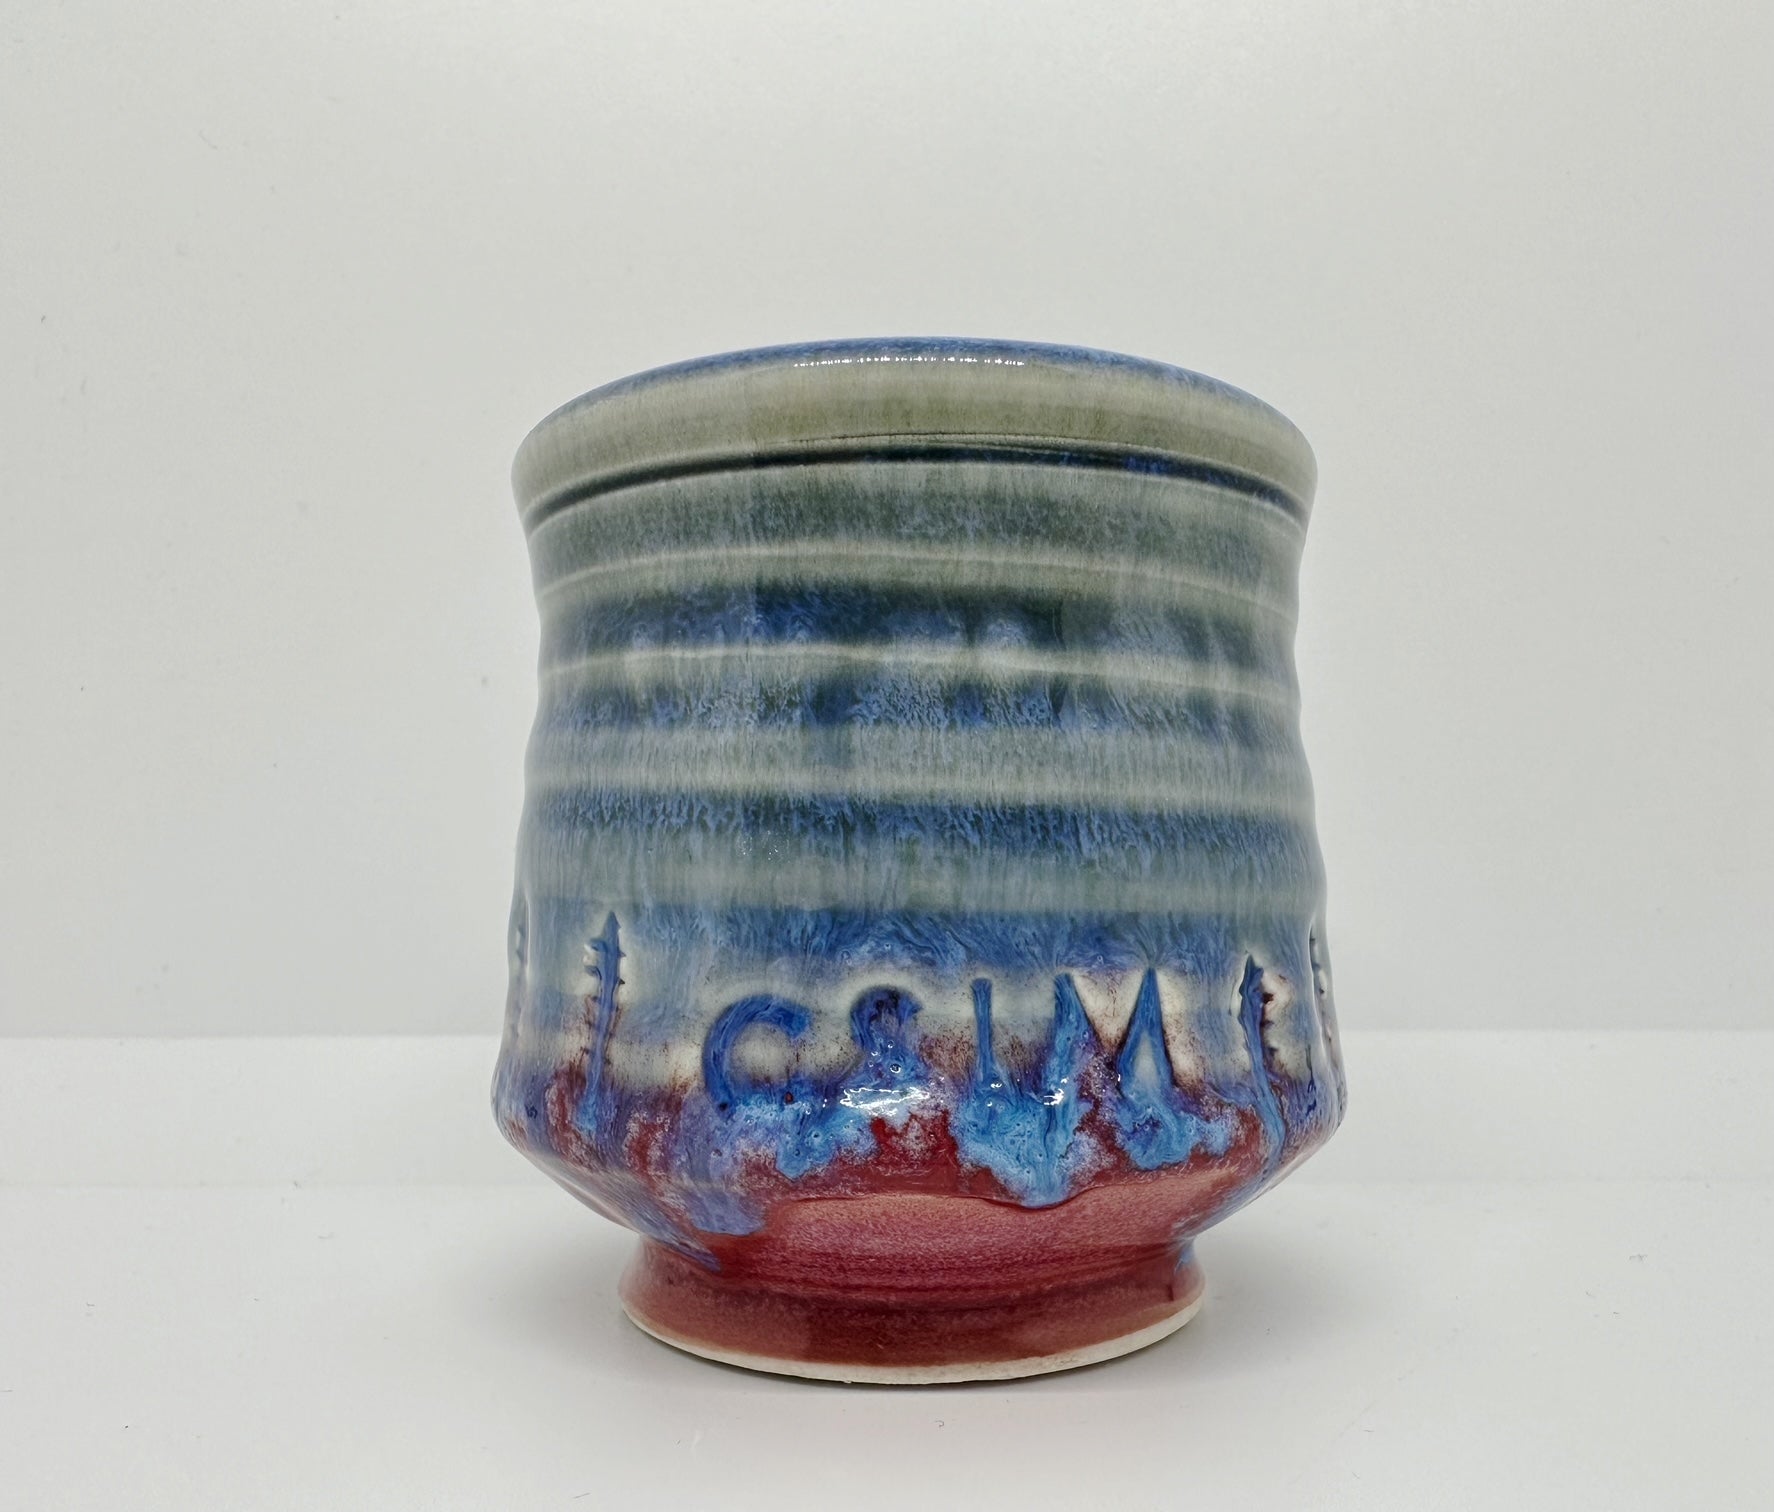 Handmade ‘Small Planter 6’ with CSM logo and colorful drippy glaze 